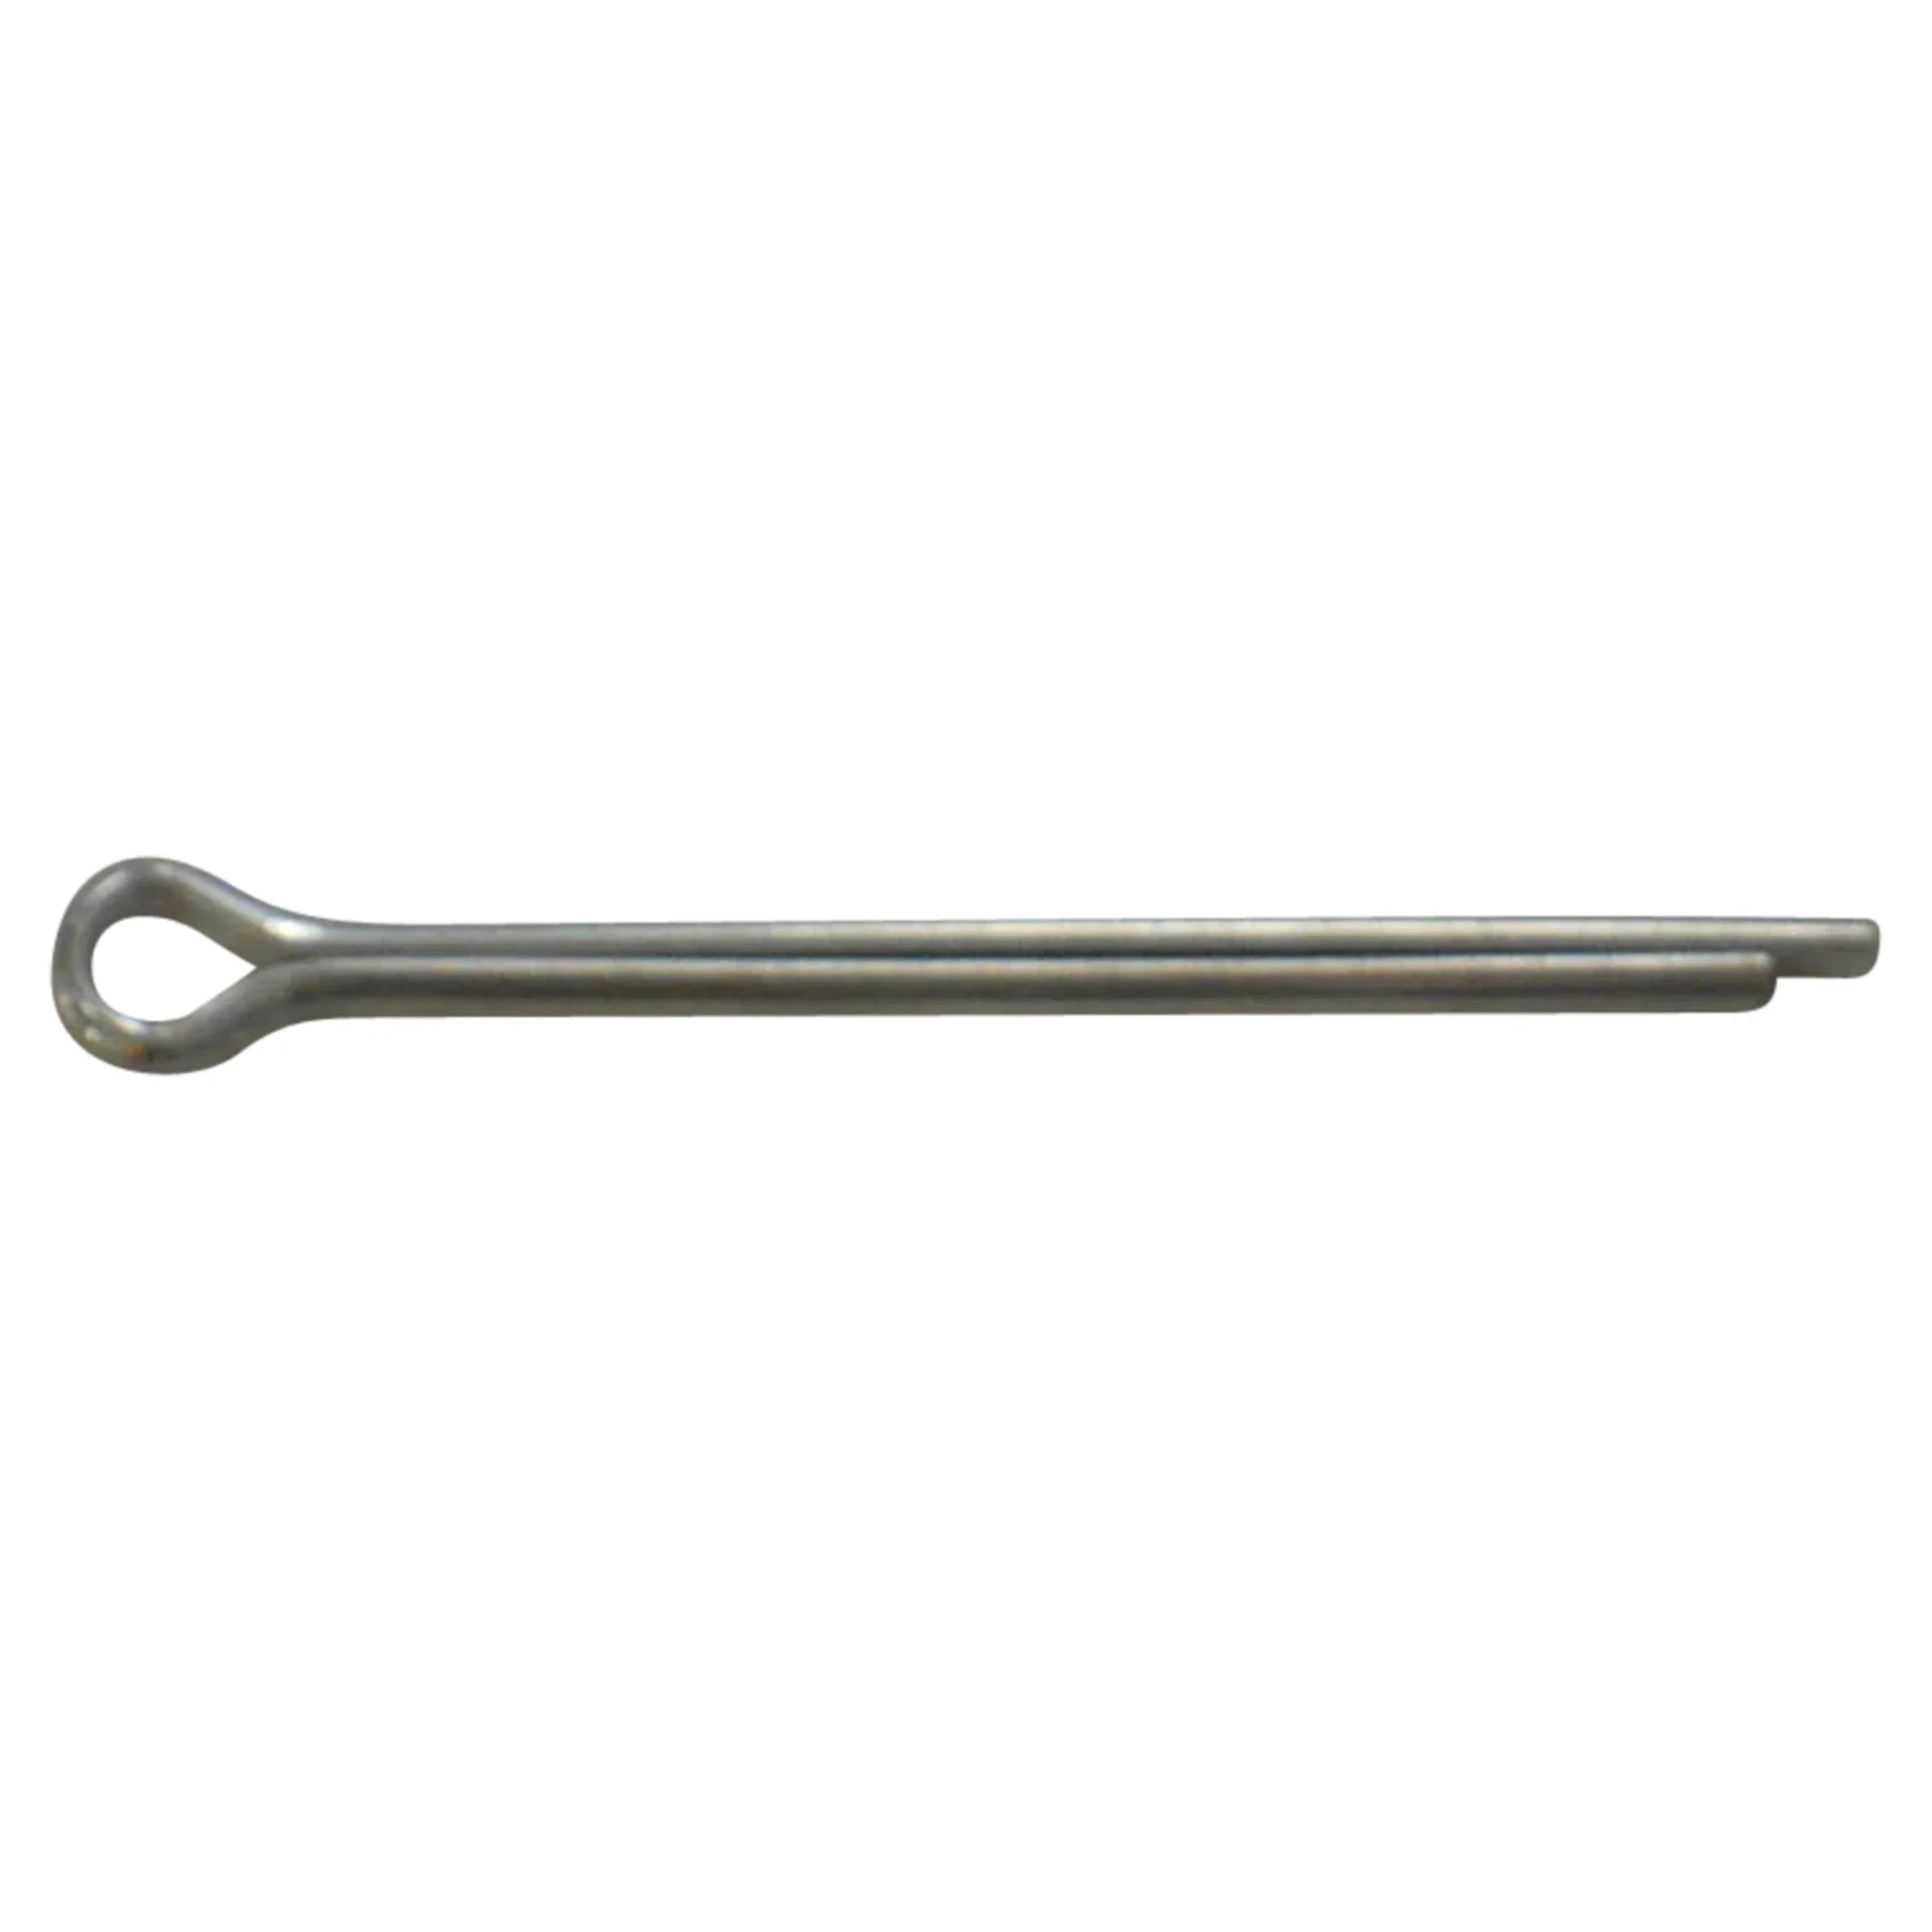 Wastebuilt® Replacement for McNeilus Pin Cotter .19X2.50 Zinc